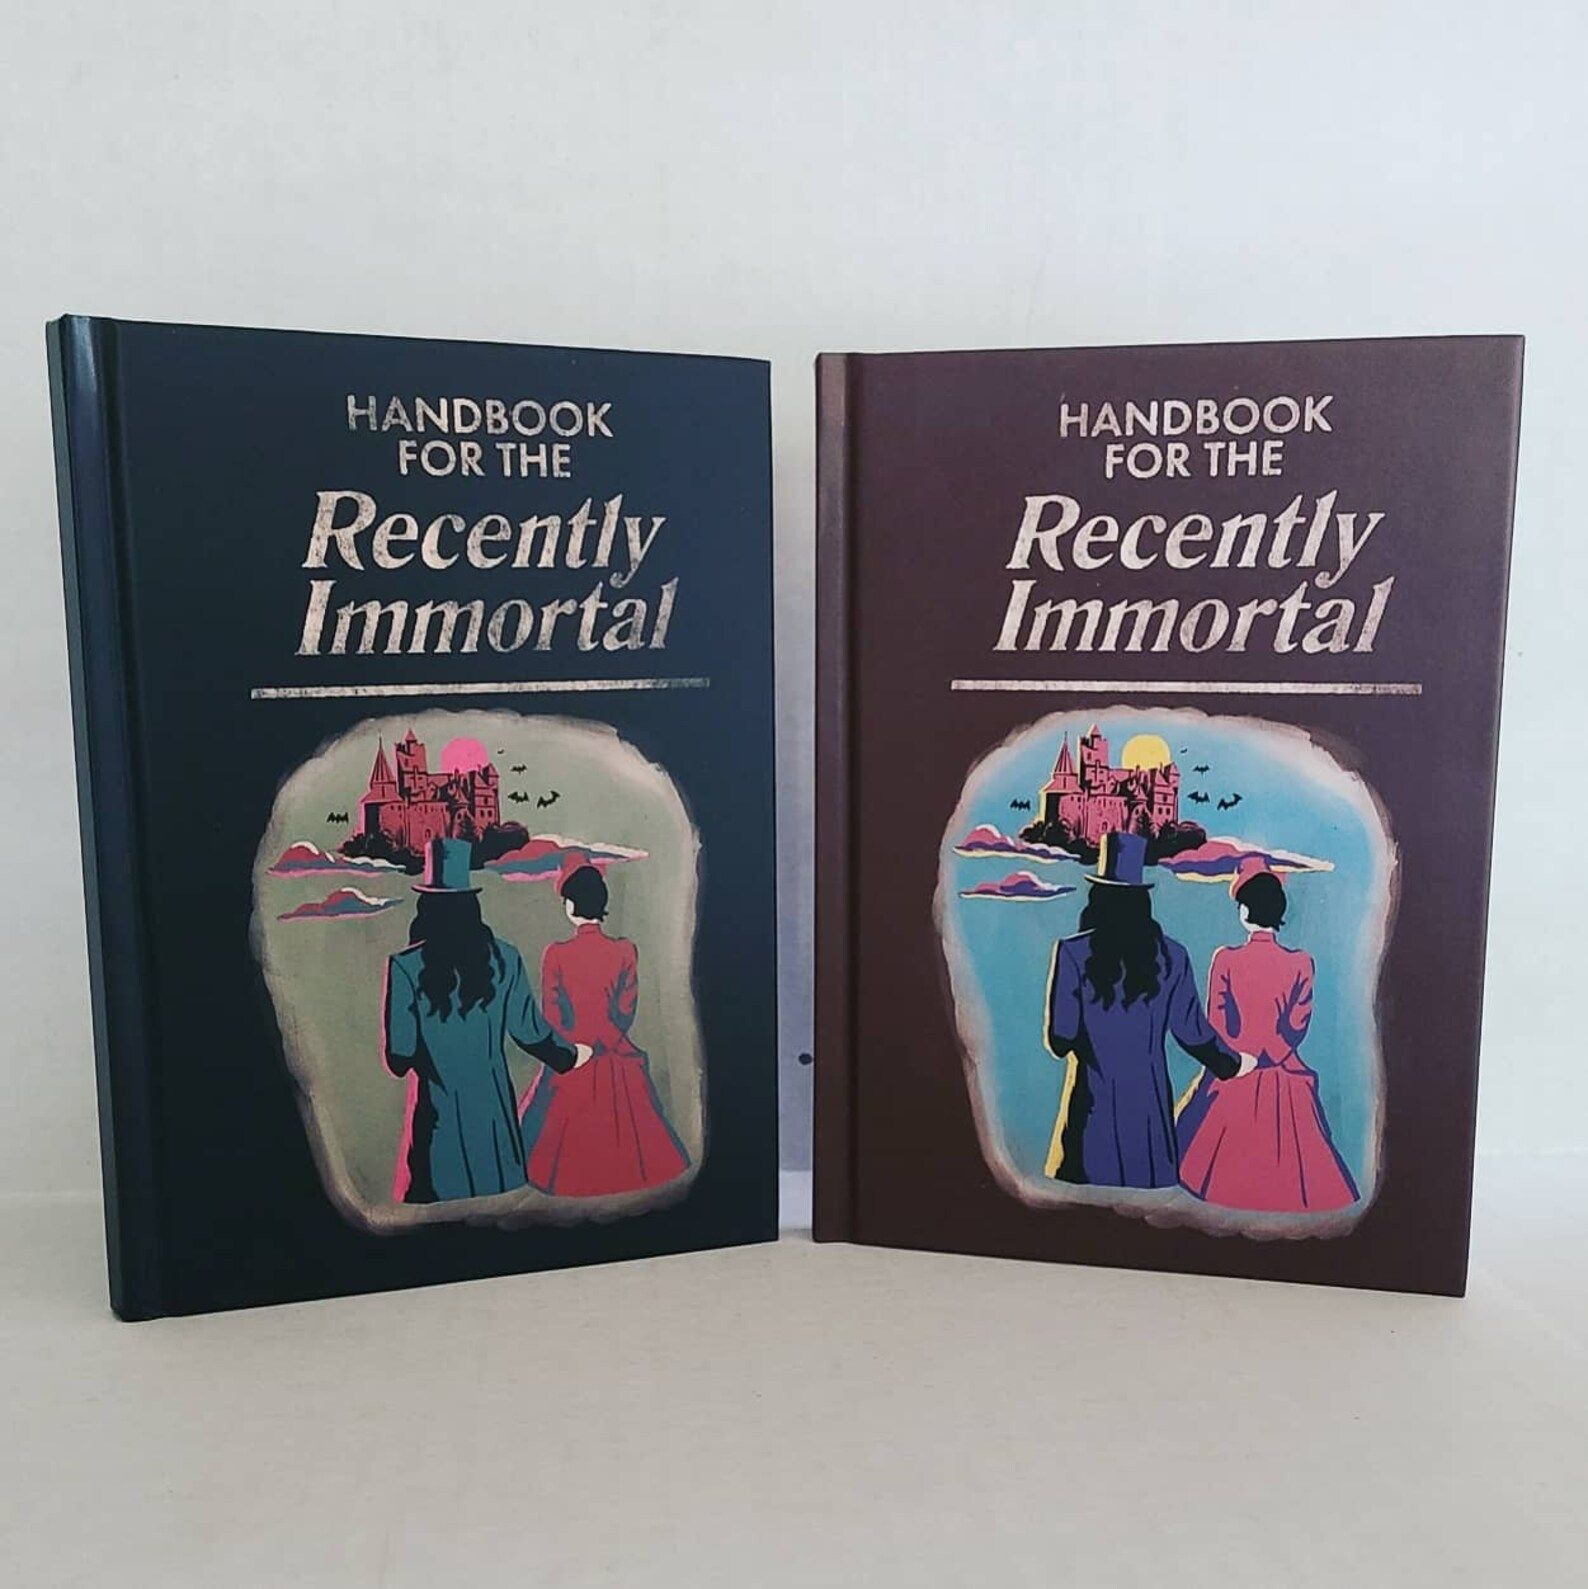 a hardcover journal with "Handbook for the Recently Immortal" on the cover, along with an image of two people looking at a far-off castle.